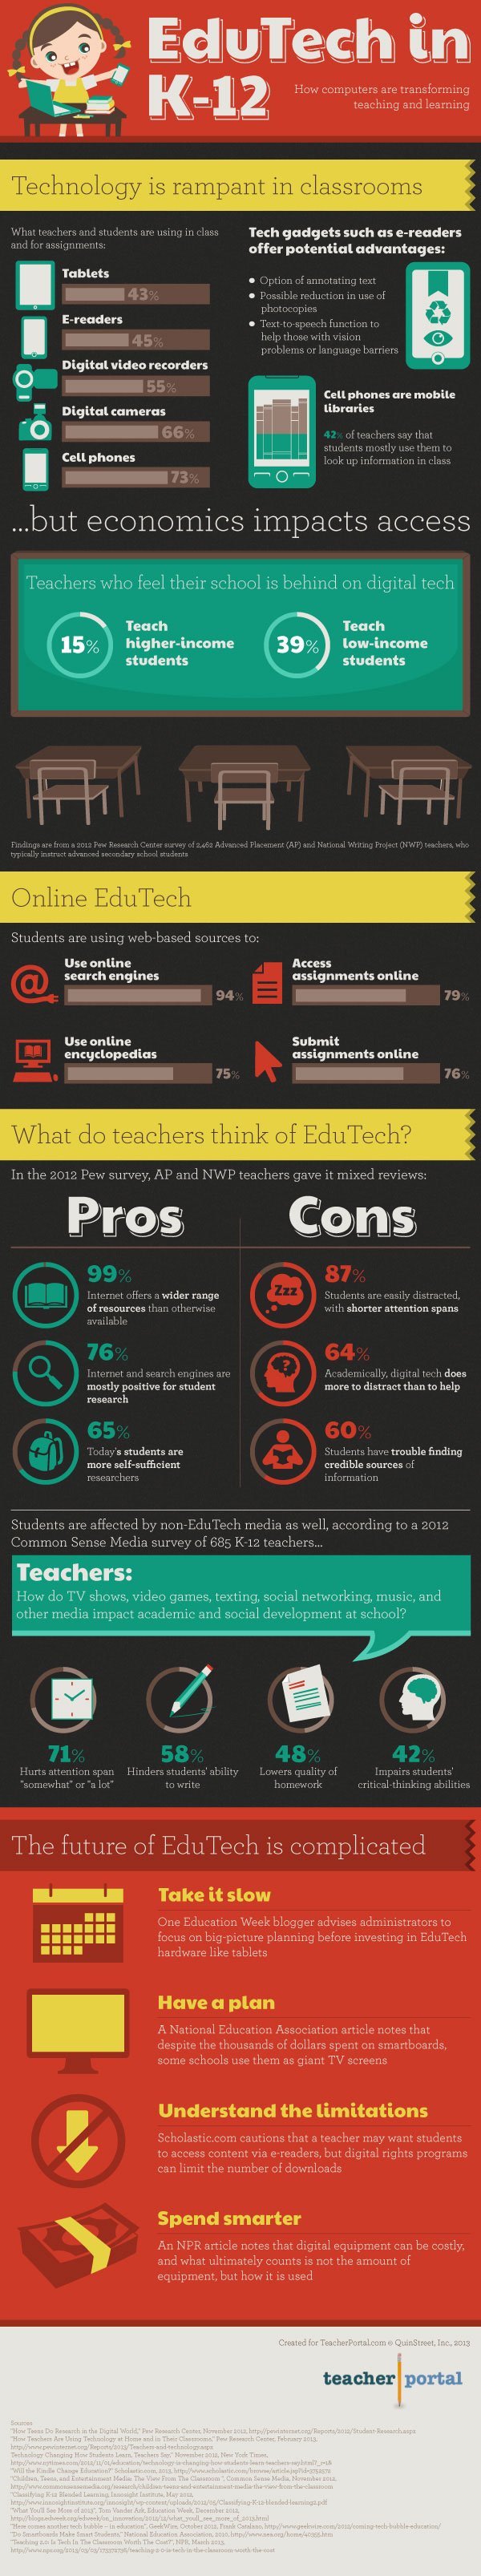 How-EdTech-Transforms-Teaching-and-Learning-Infographic